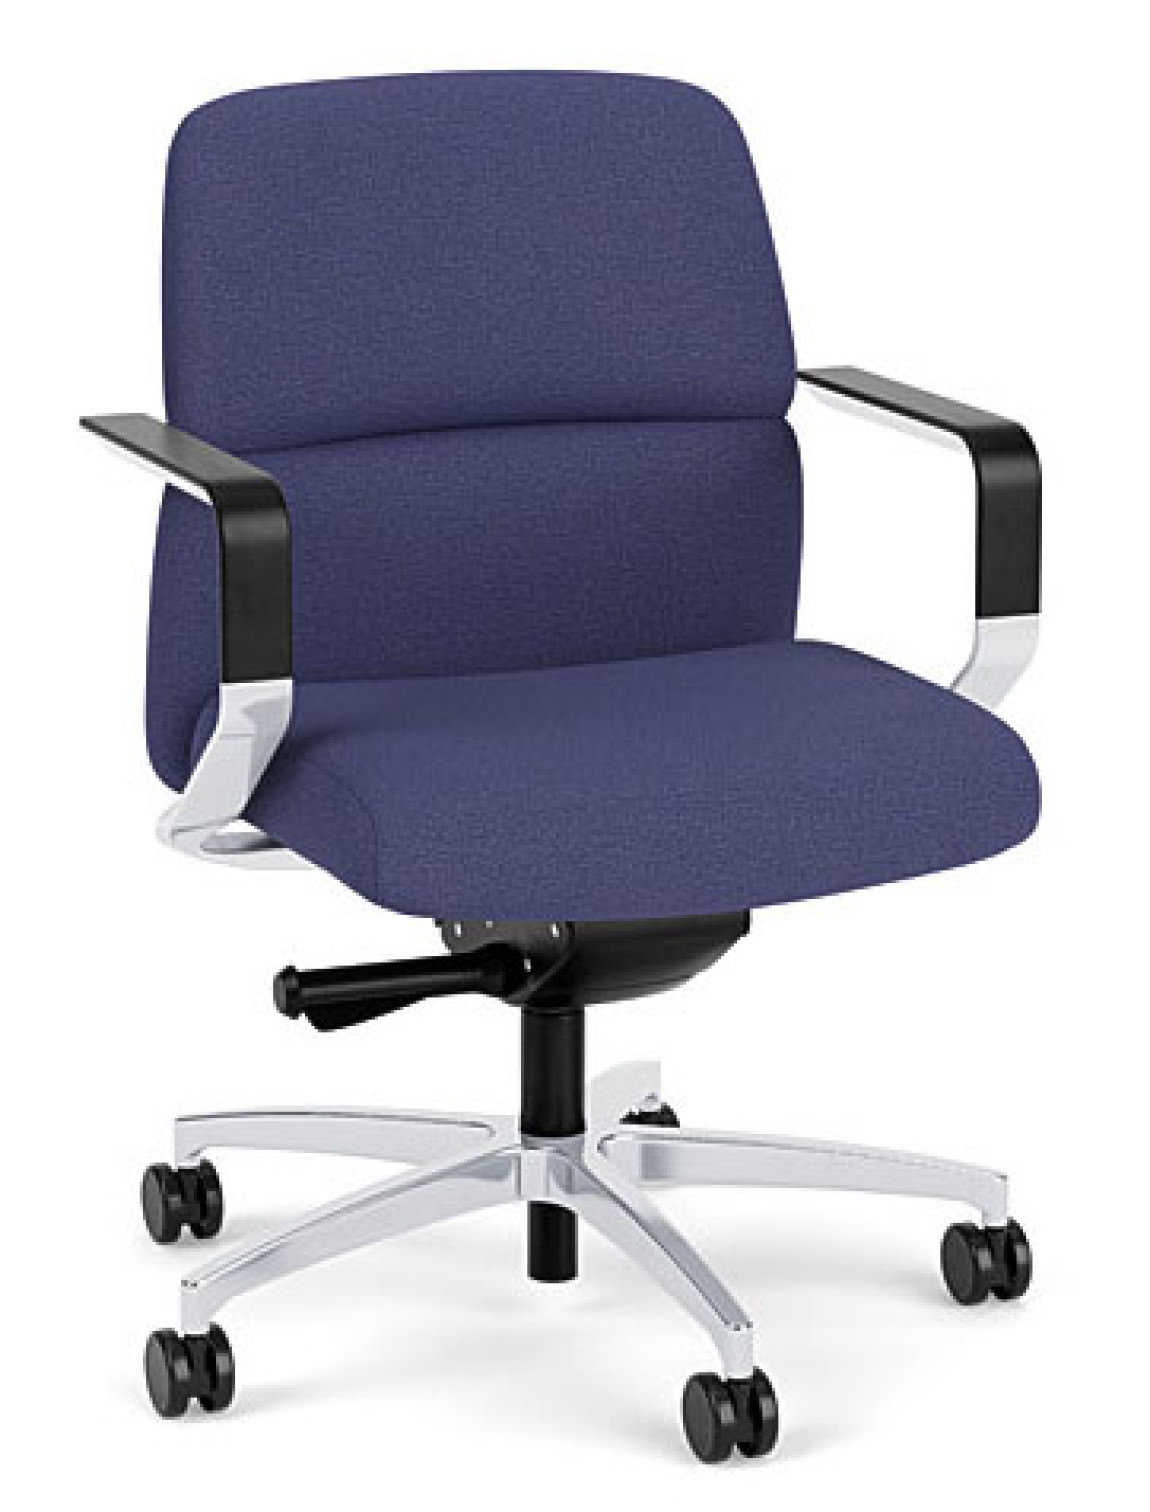 Fabric Mid Back Conference Room Chair